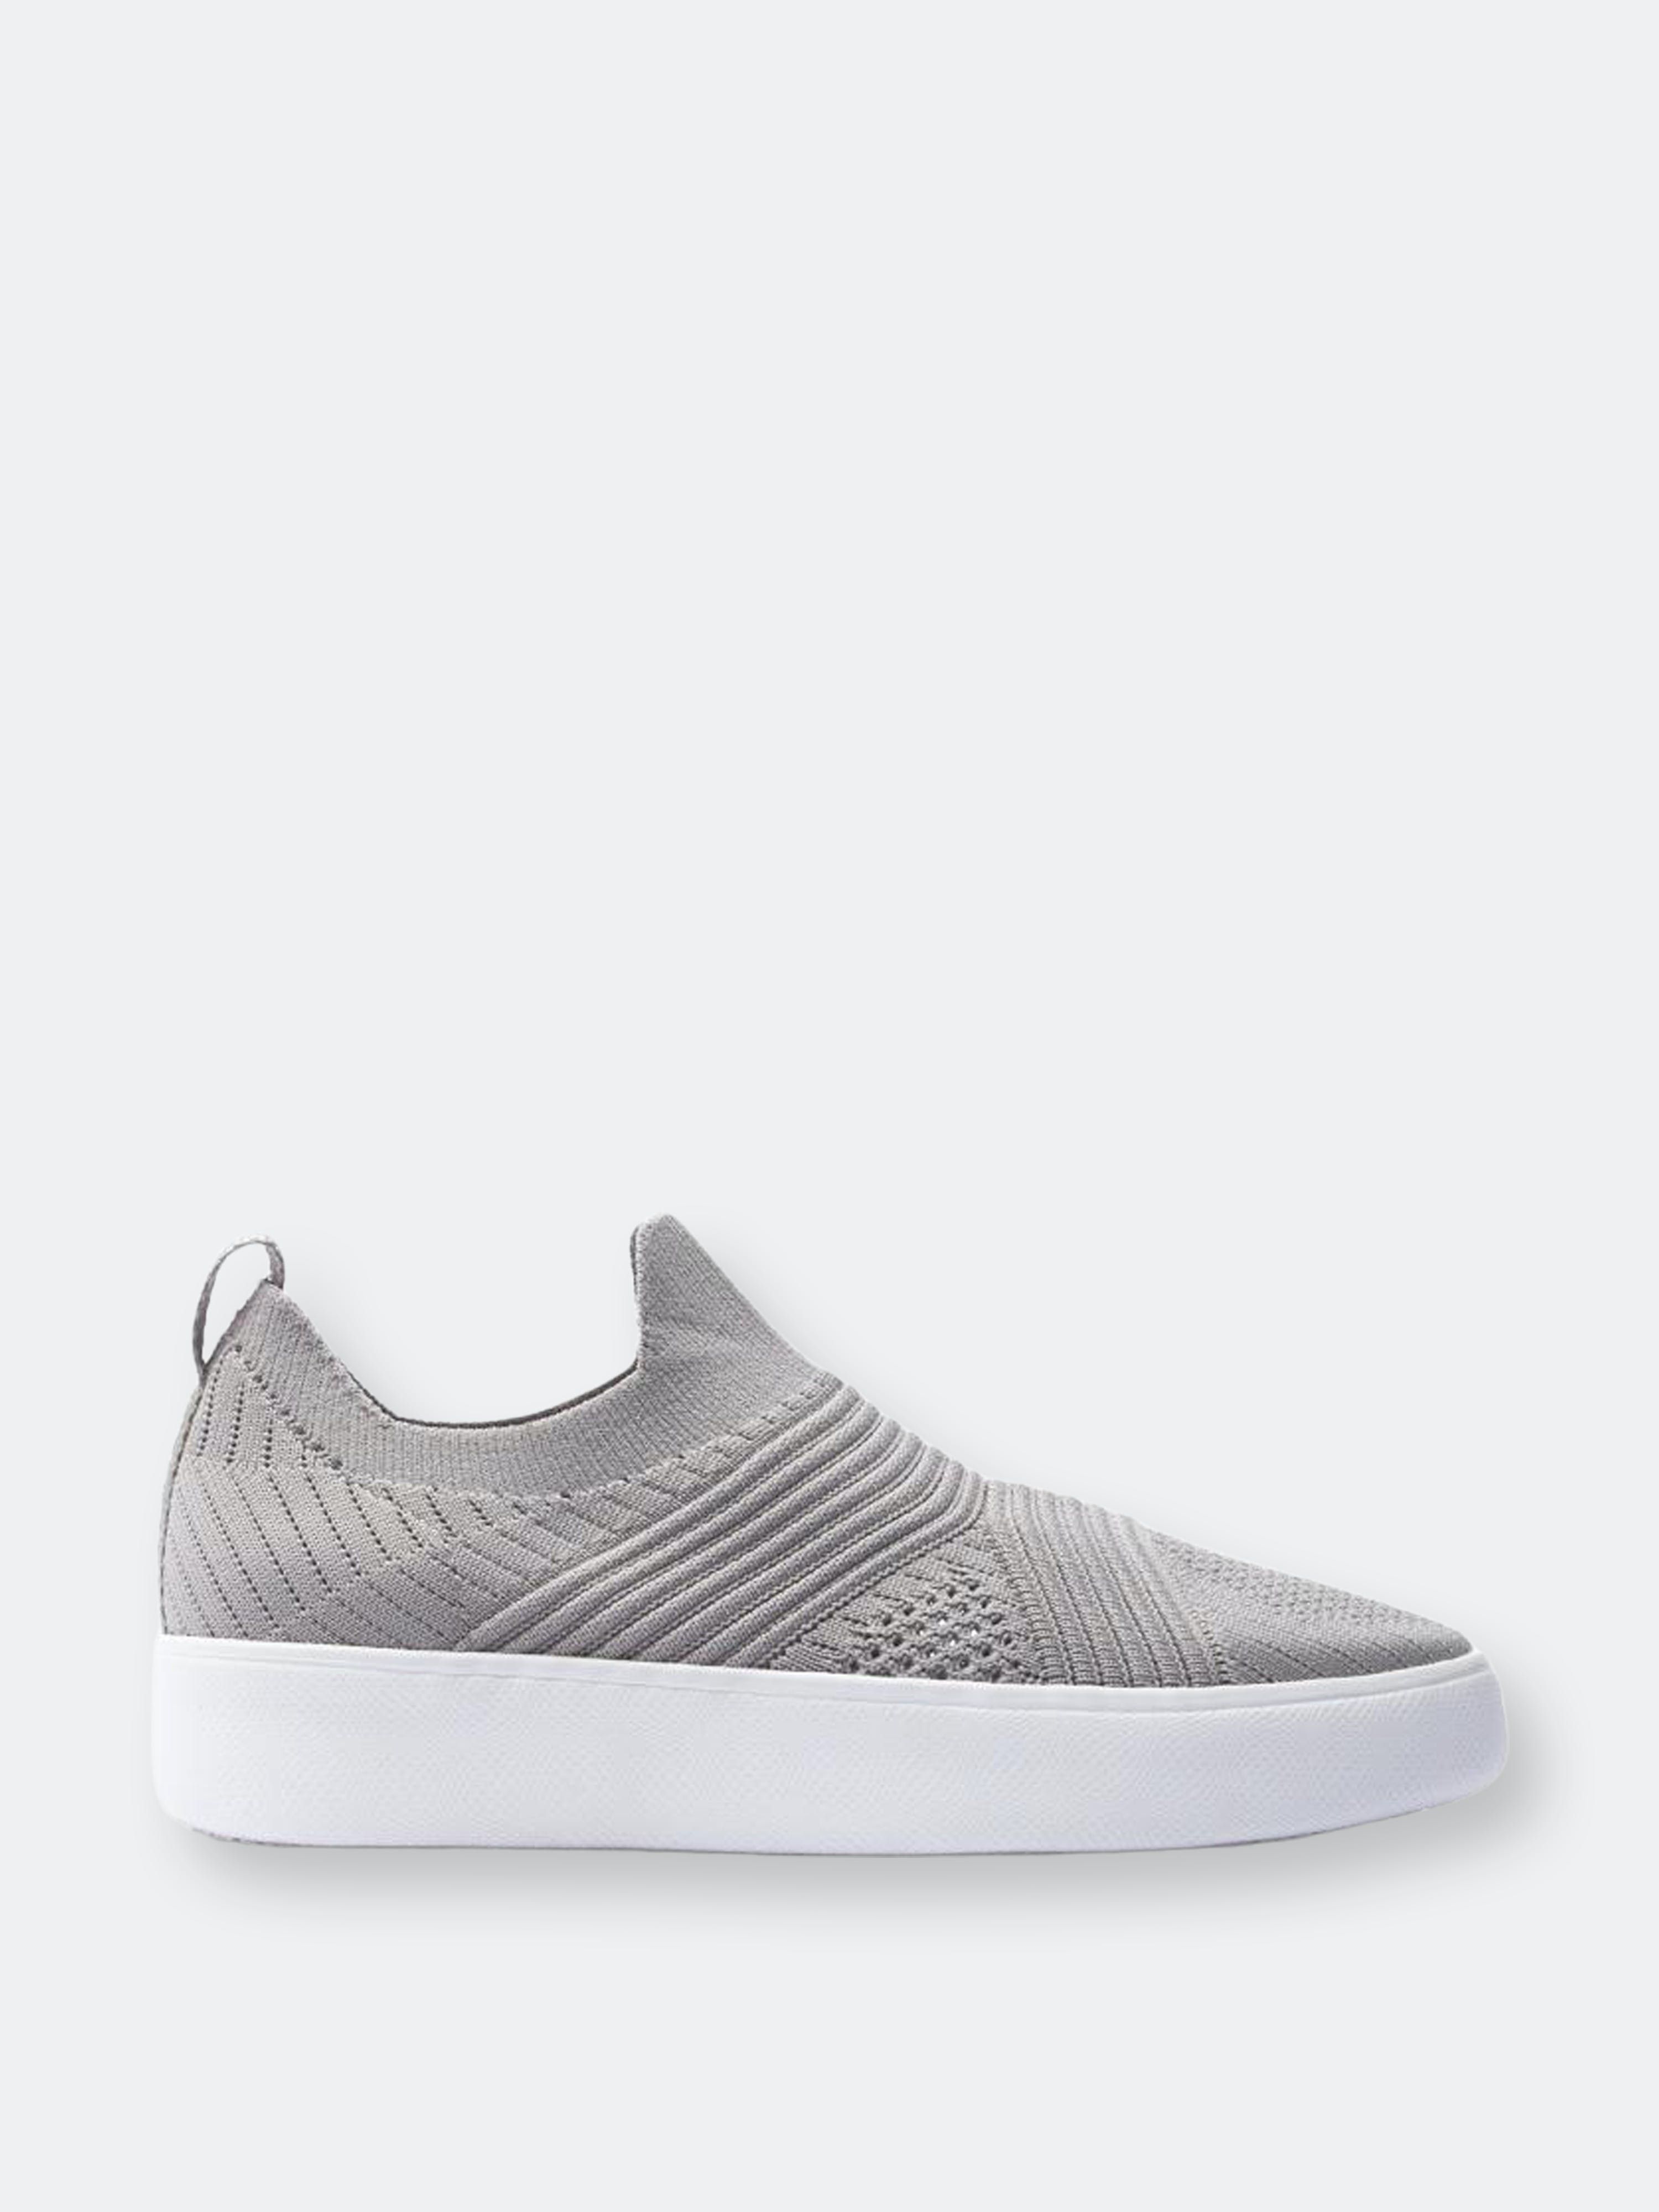 Limitless Grey Sneakers - 6.5 - Also in: 6, 5.5, 9, 7, 5, 7.5, 8, 10, 8.5 | Verishop